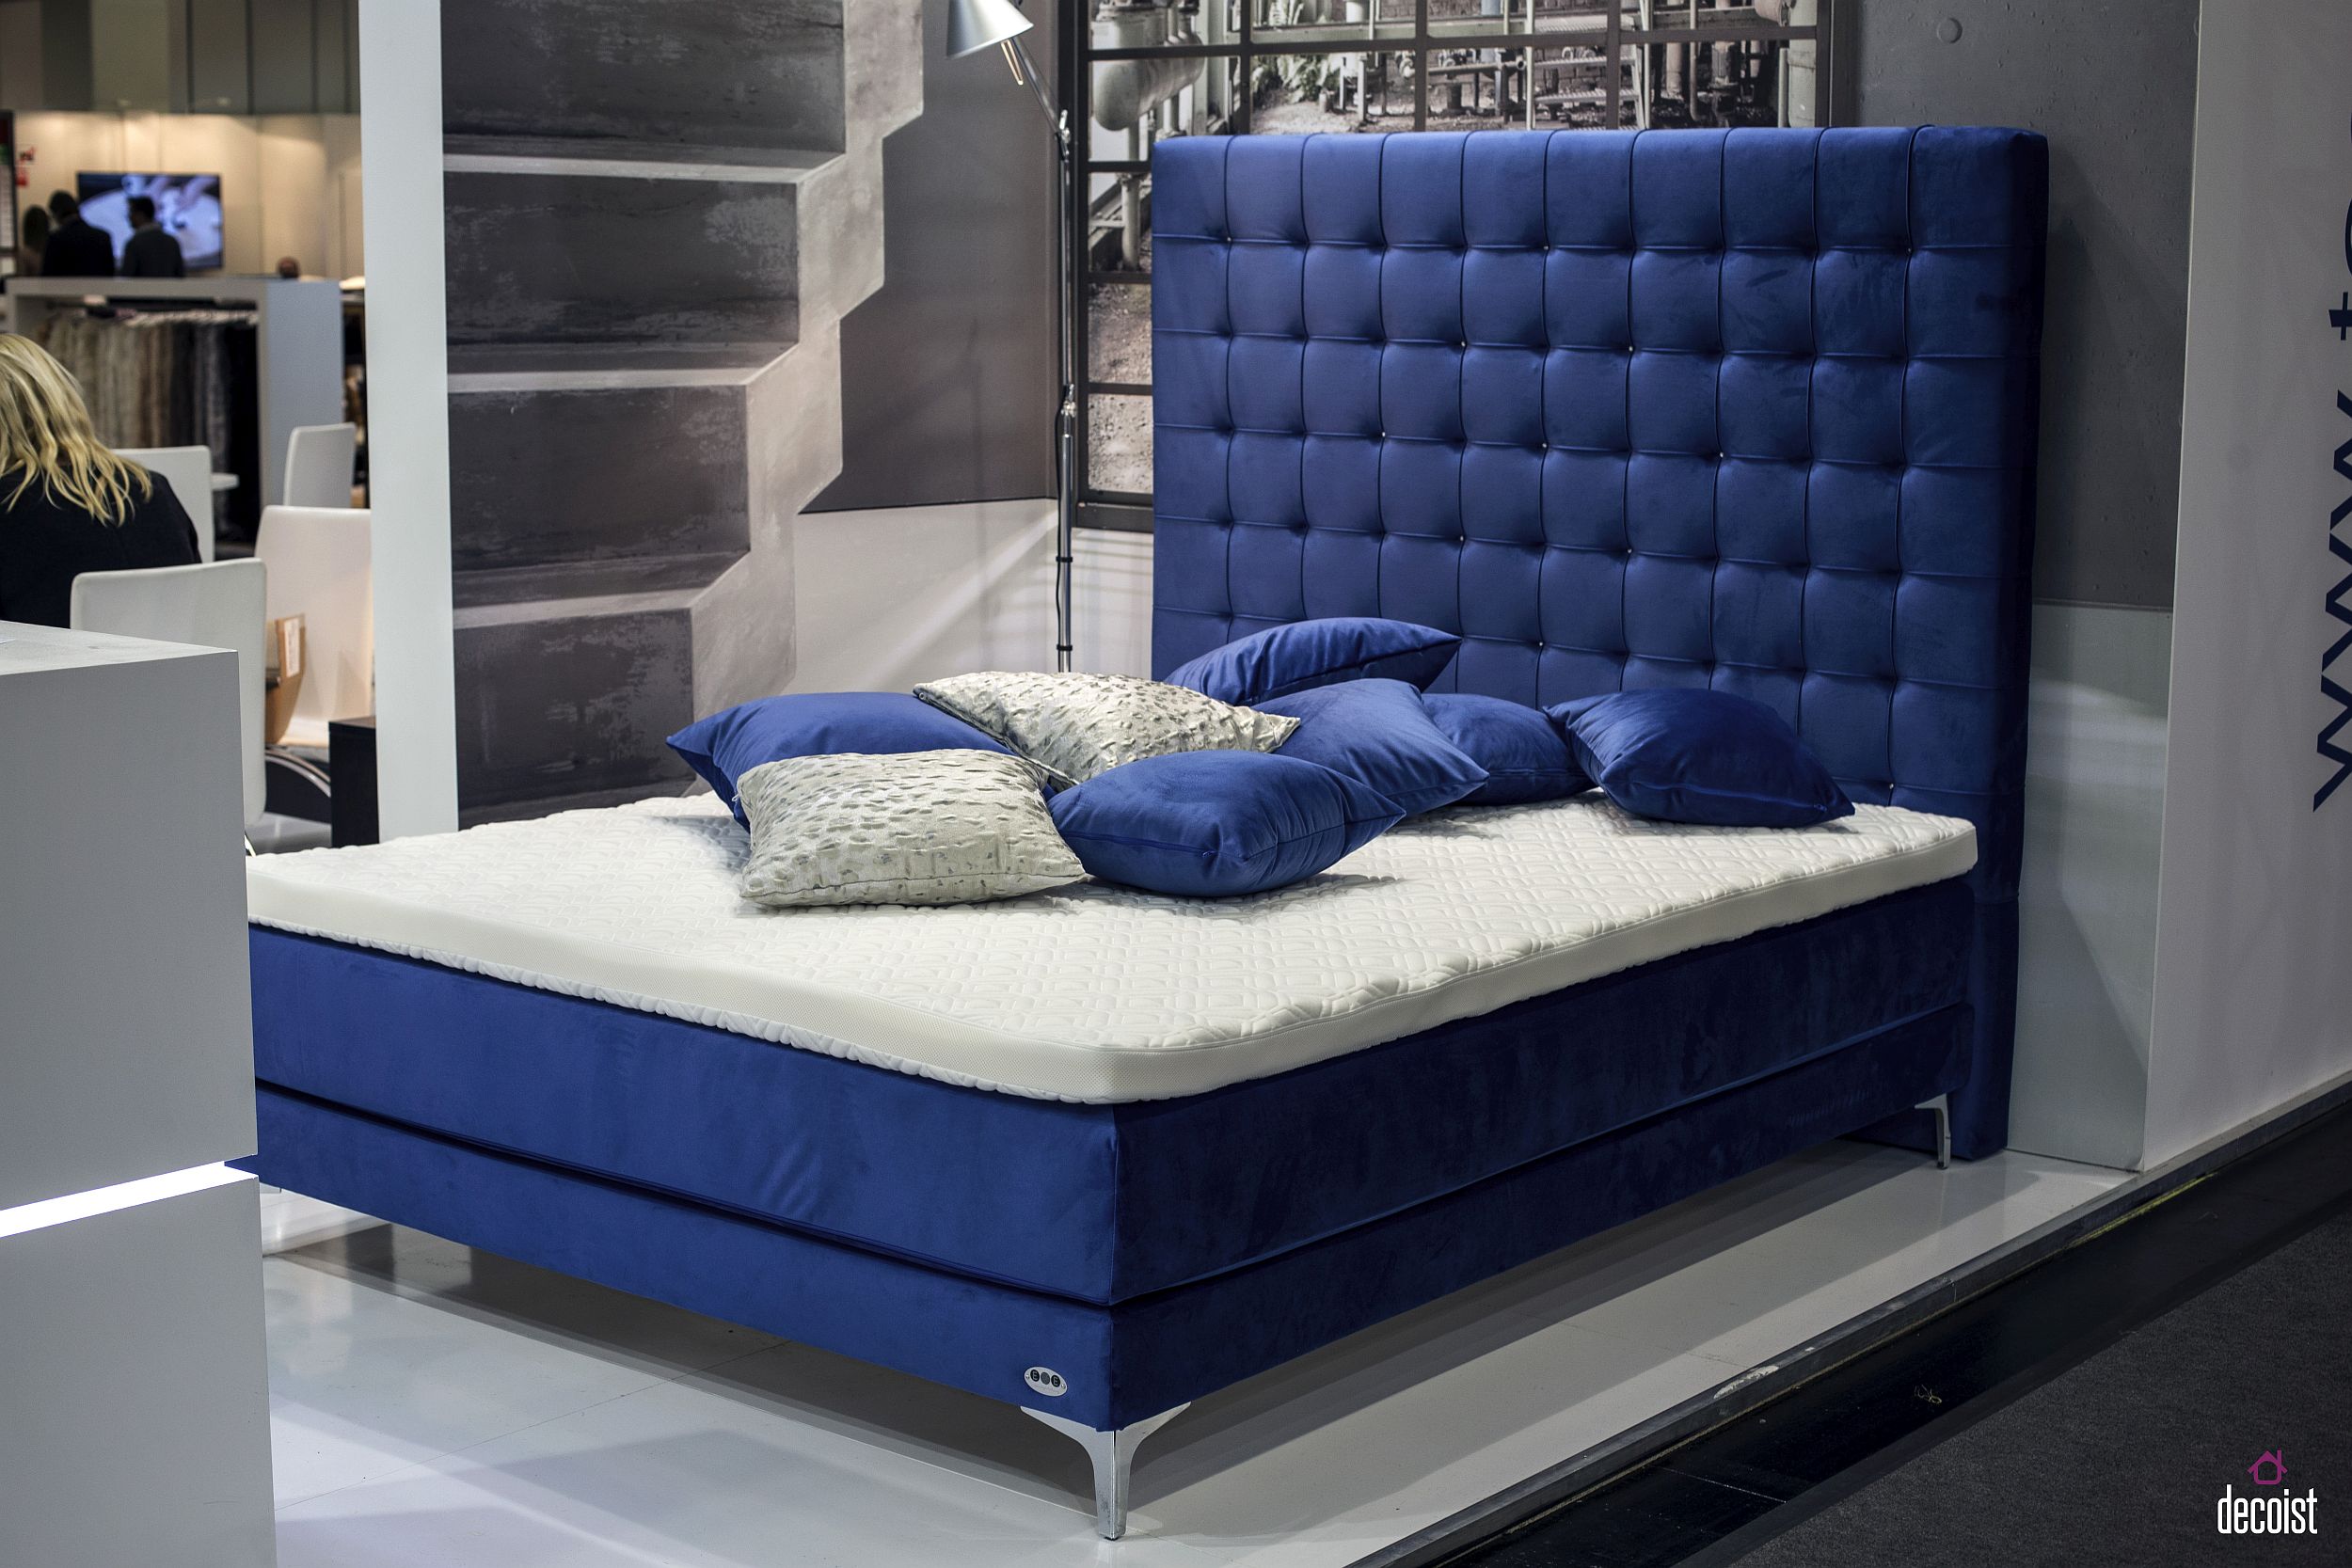 Exquisite-tufted-headboard-in-bold-blue-gives-this-bed-its-unique-look